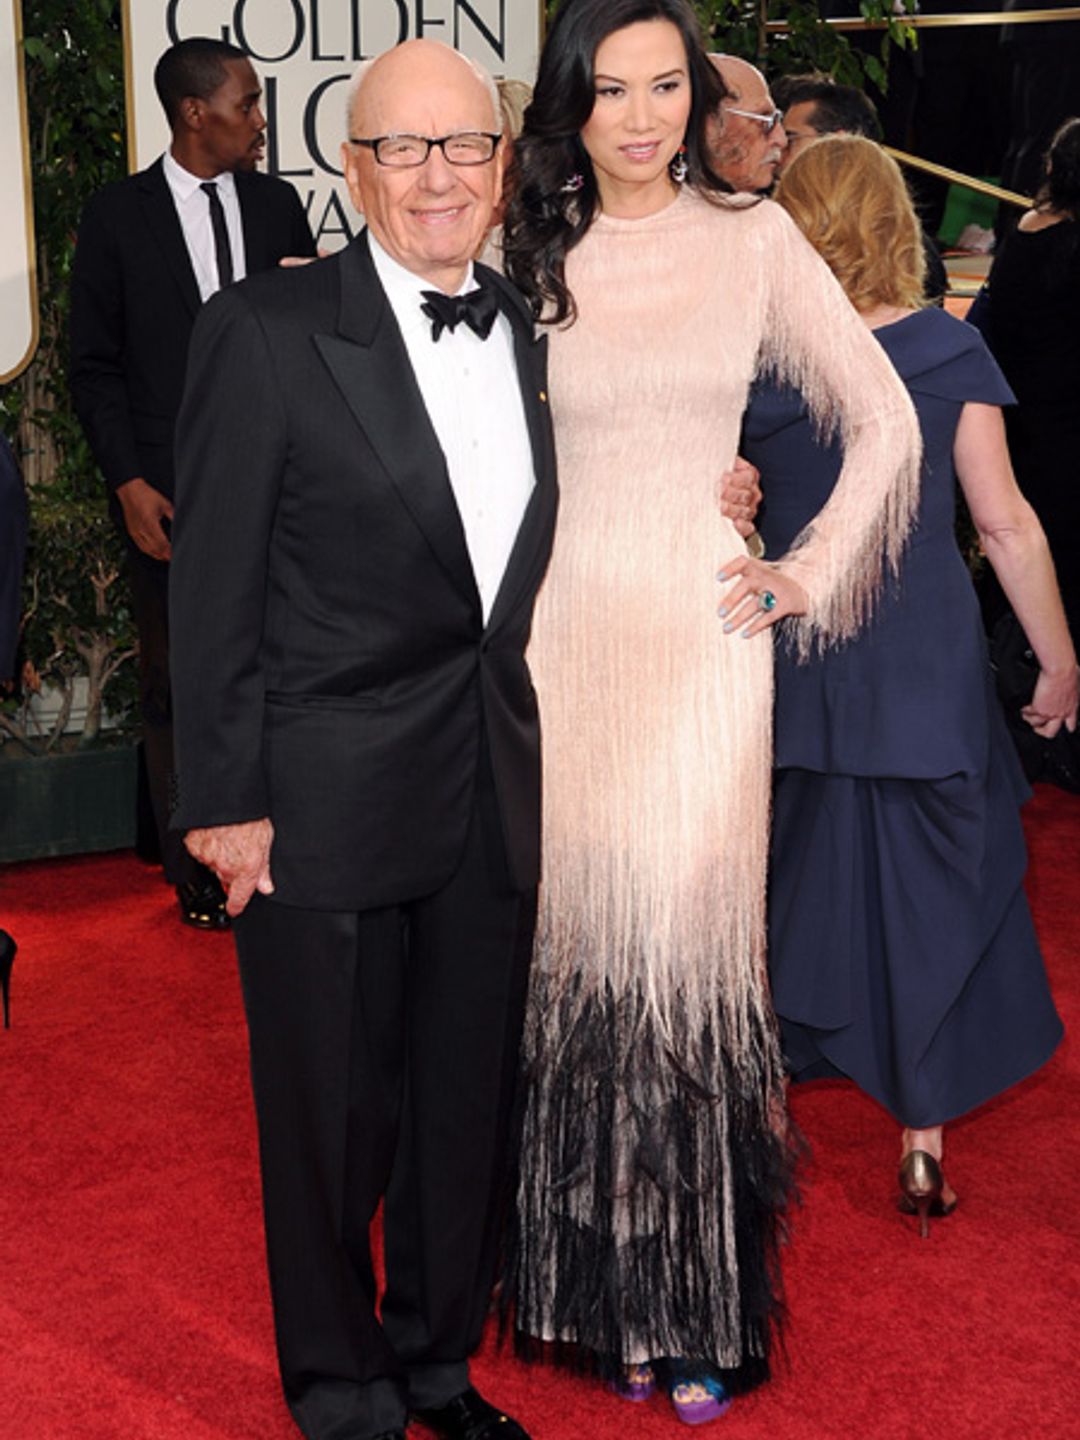 Rupert Murdoch in a suit with his ex wife Wendi on the red carpet